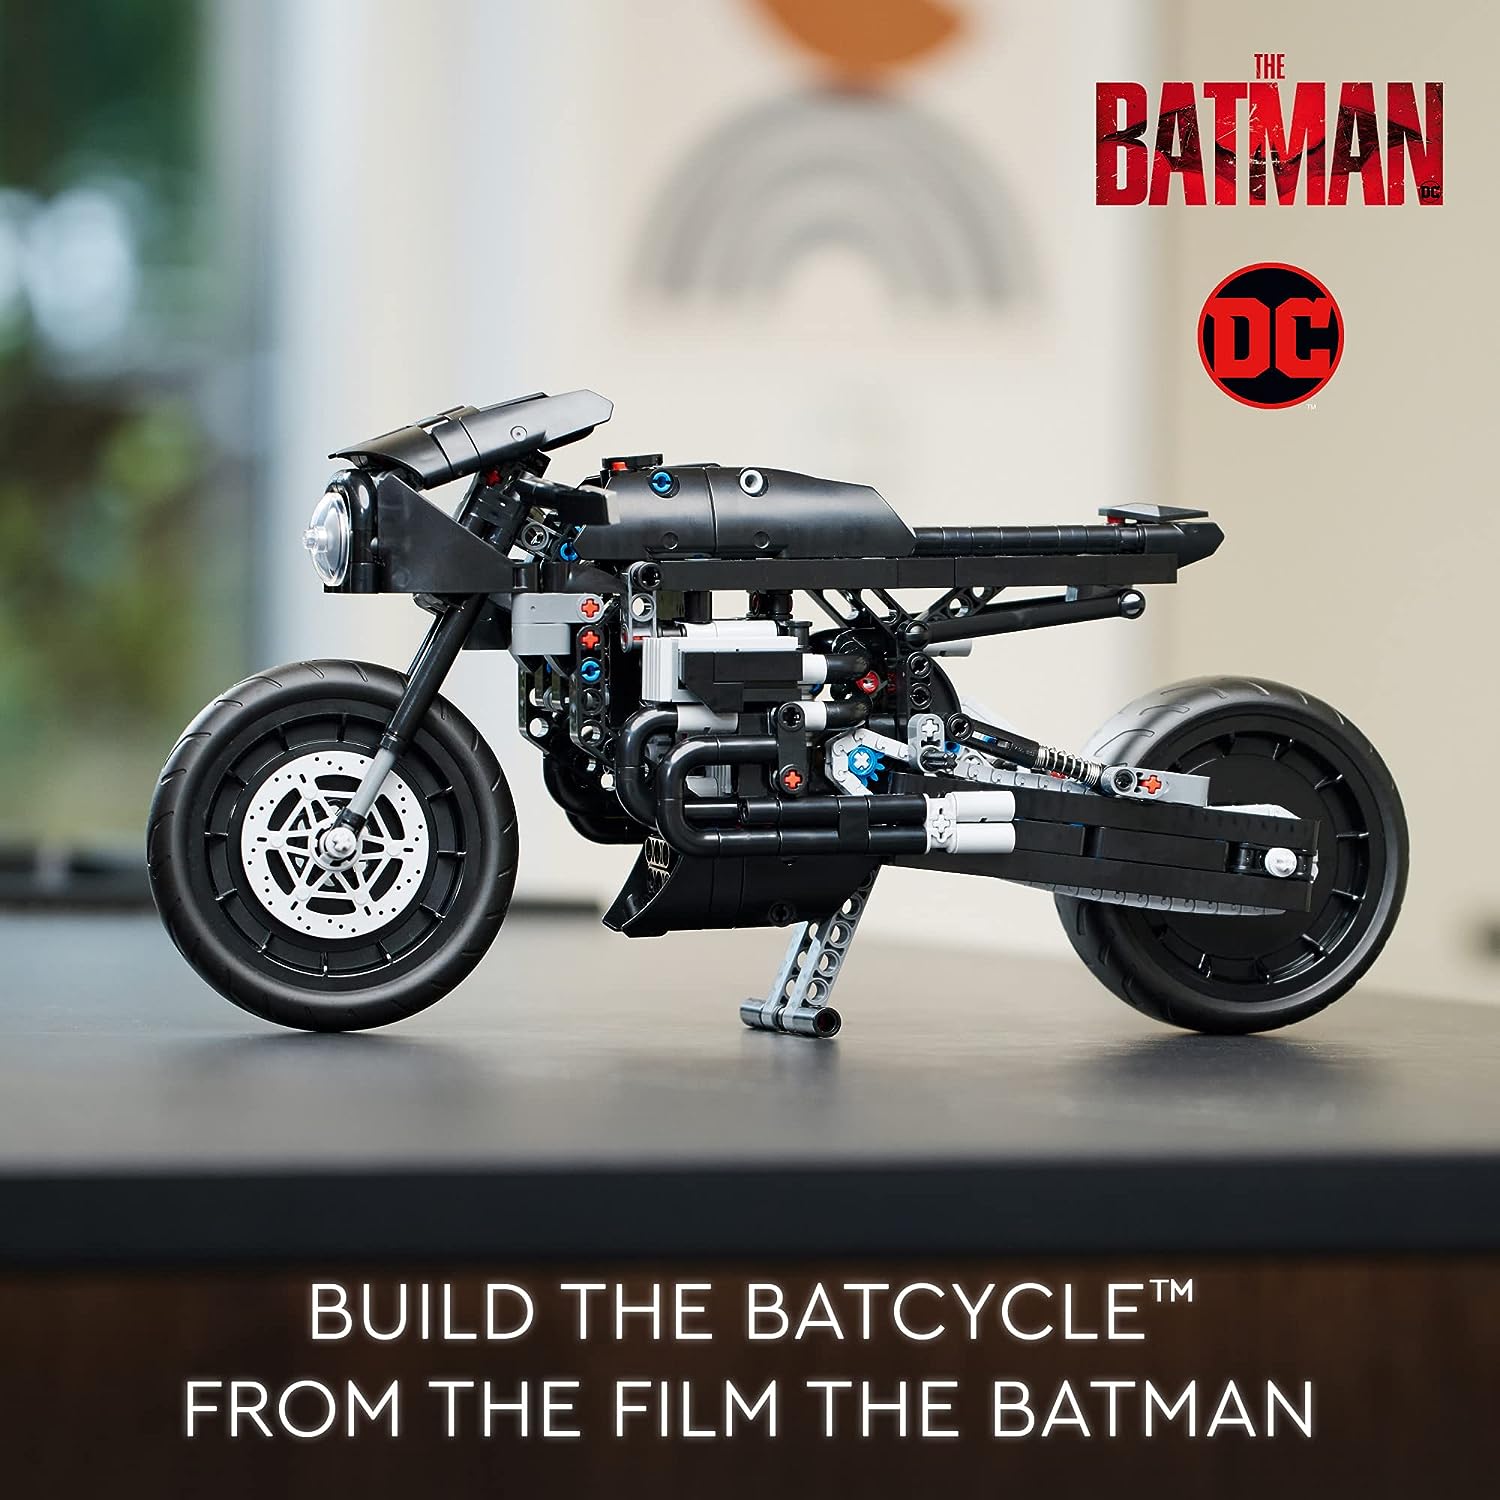 LEGO 42155 Technic The Batman – BATCYCLE Set, Collectible Toy Motorcycle, Scale Model Building Kit